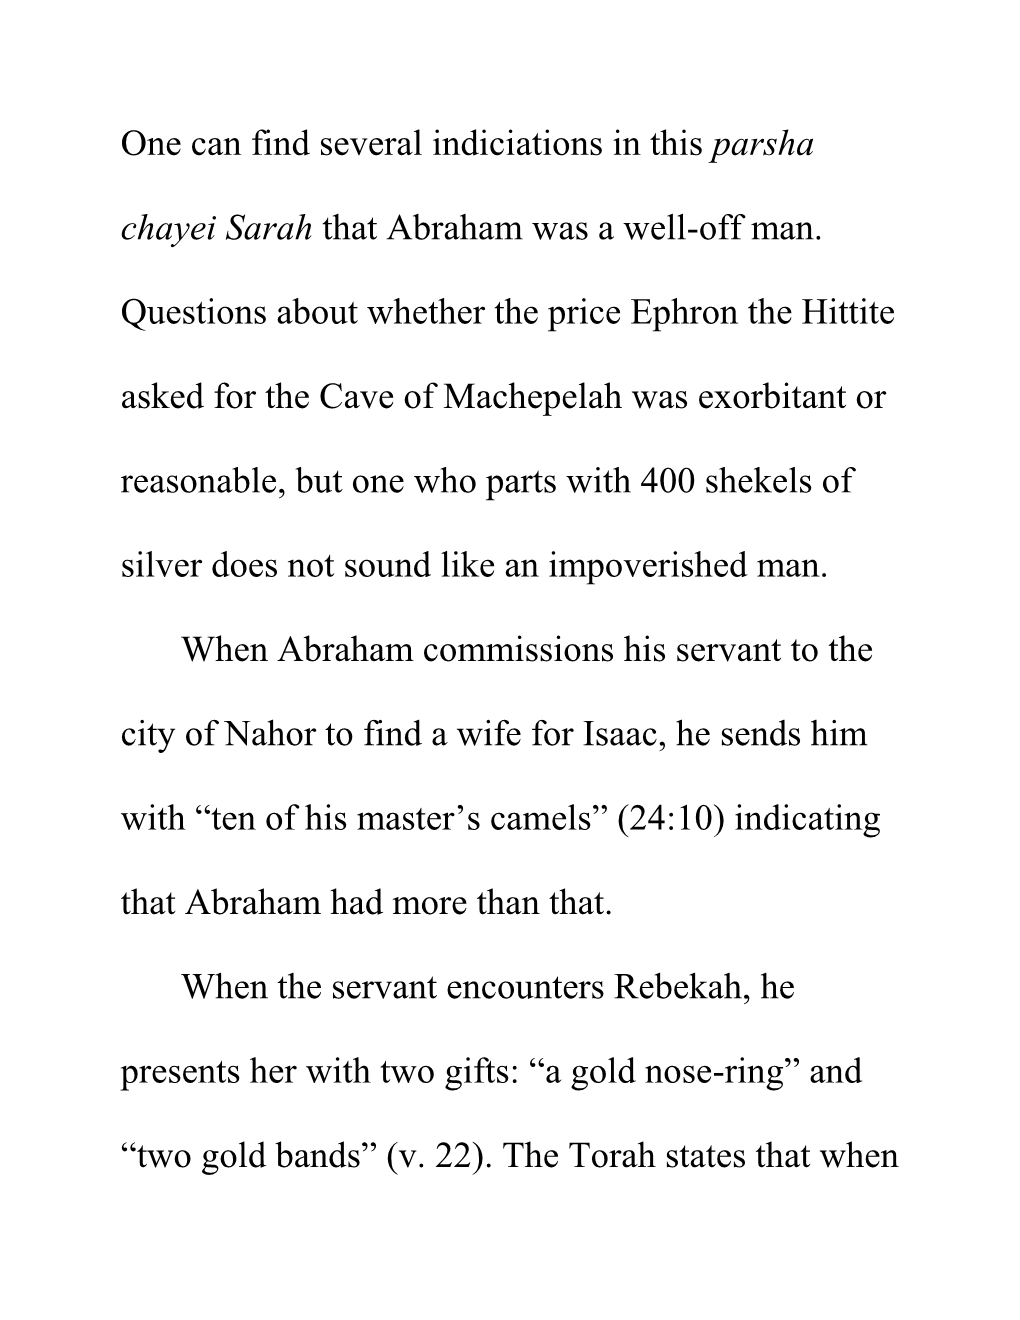 Parsha Chayei Sarah That Abraham Was a Well-Off Man